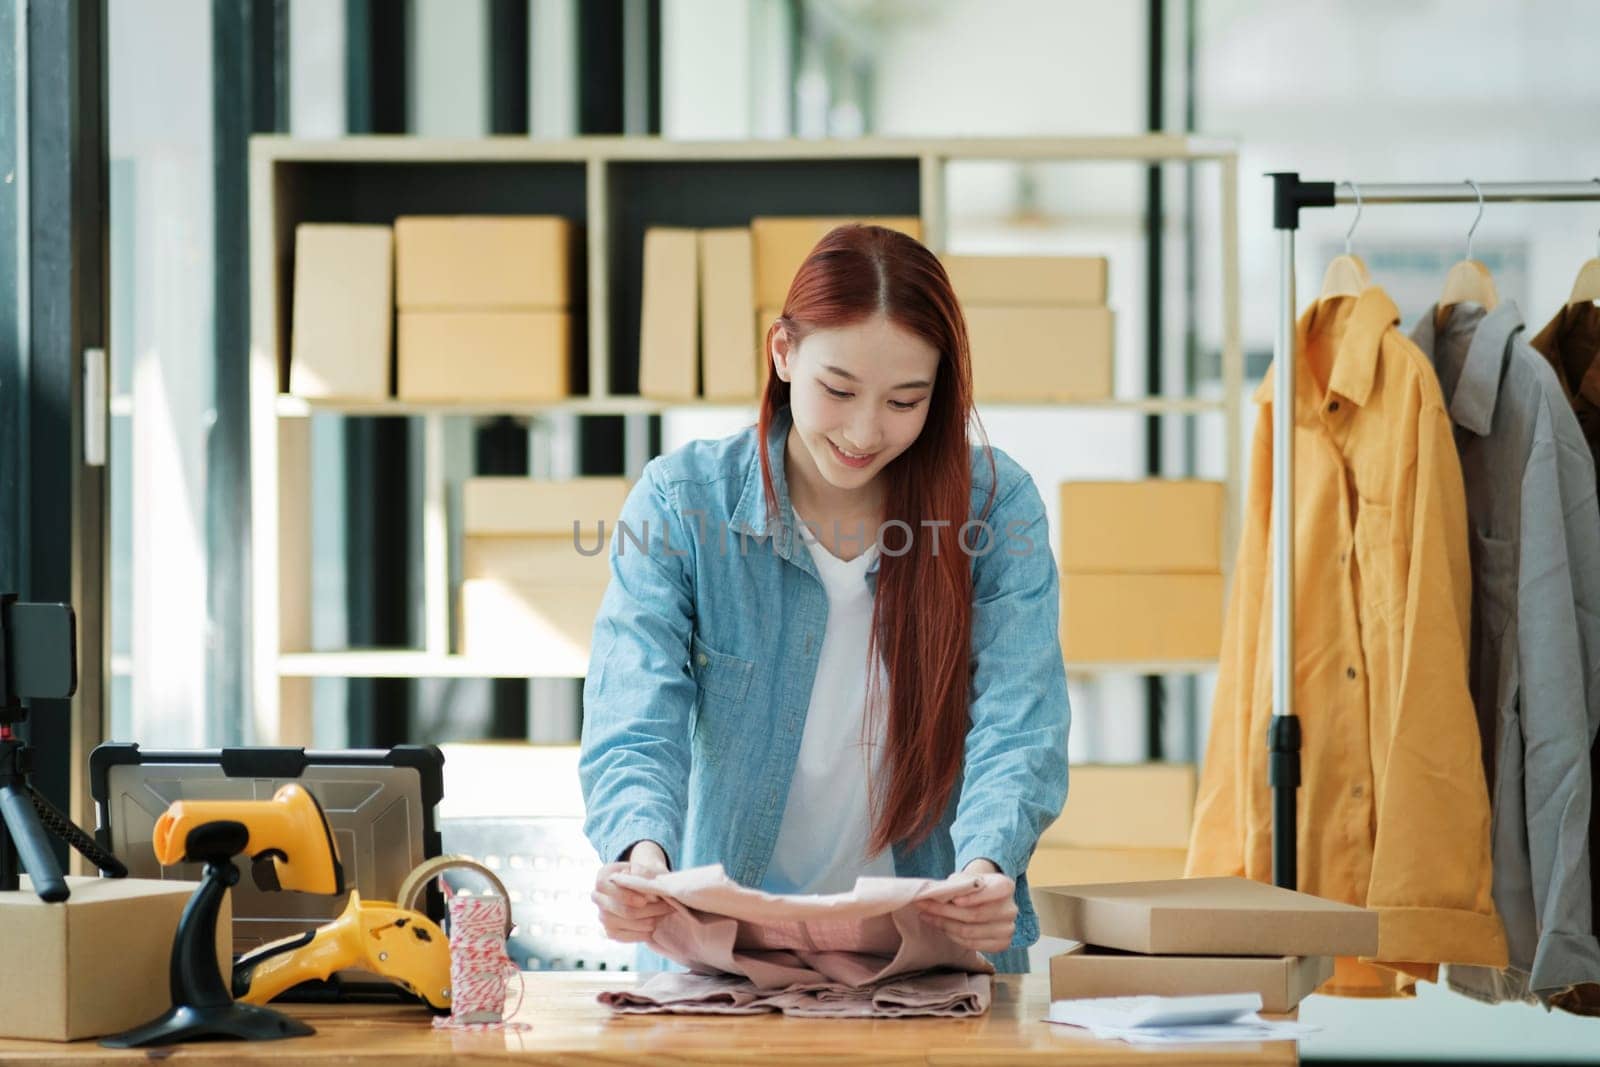 Small Business Owner Preparing Order for Shipment by ijeab